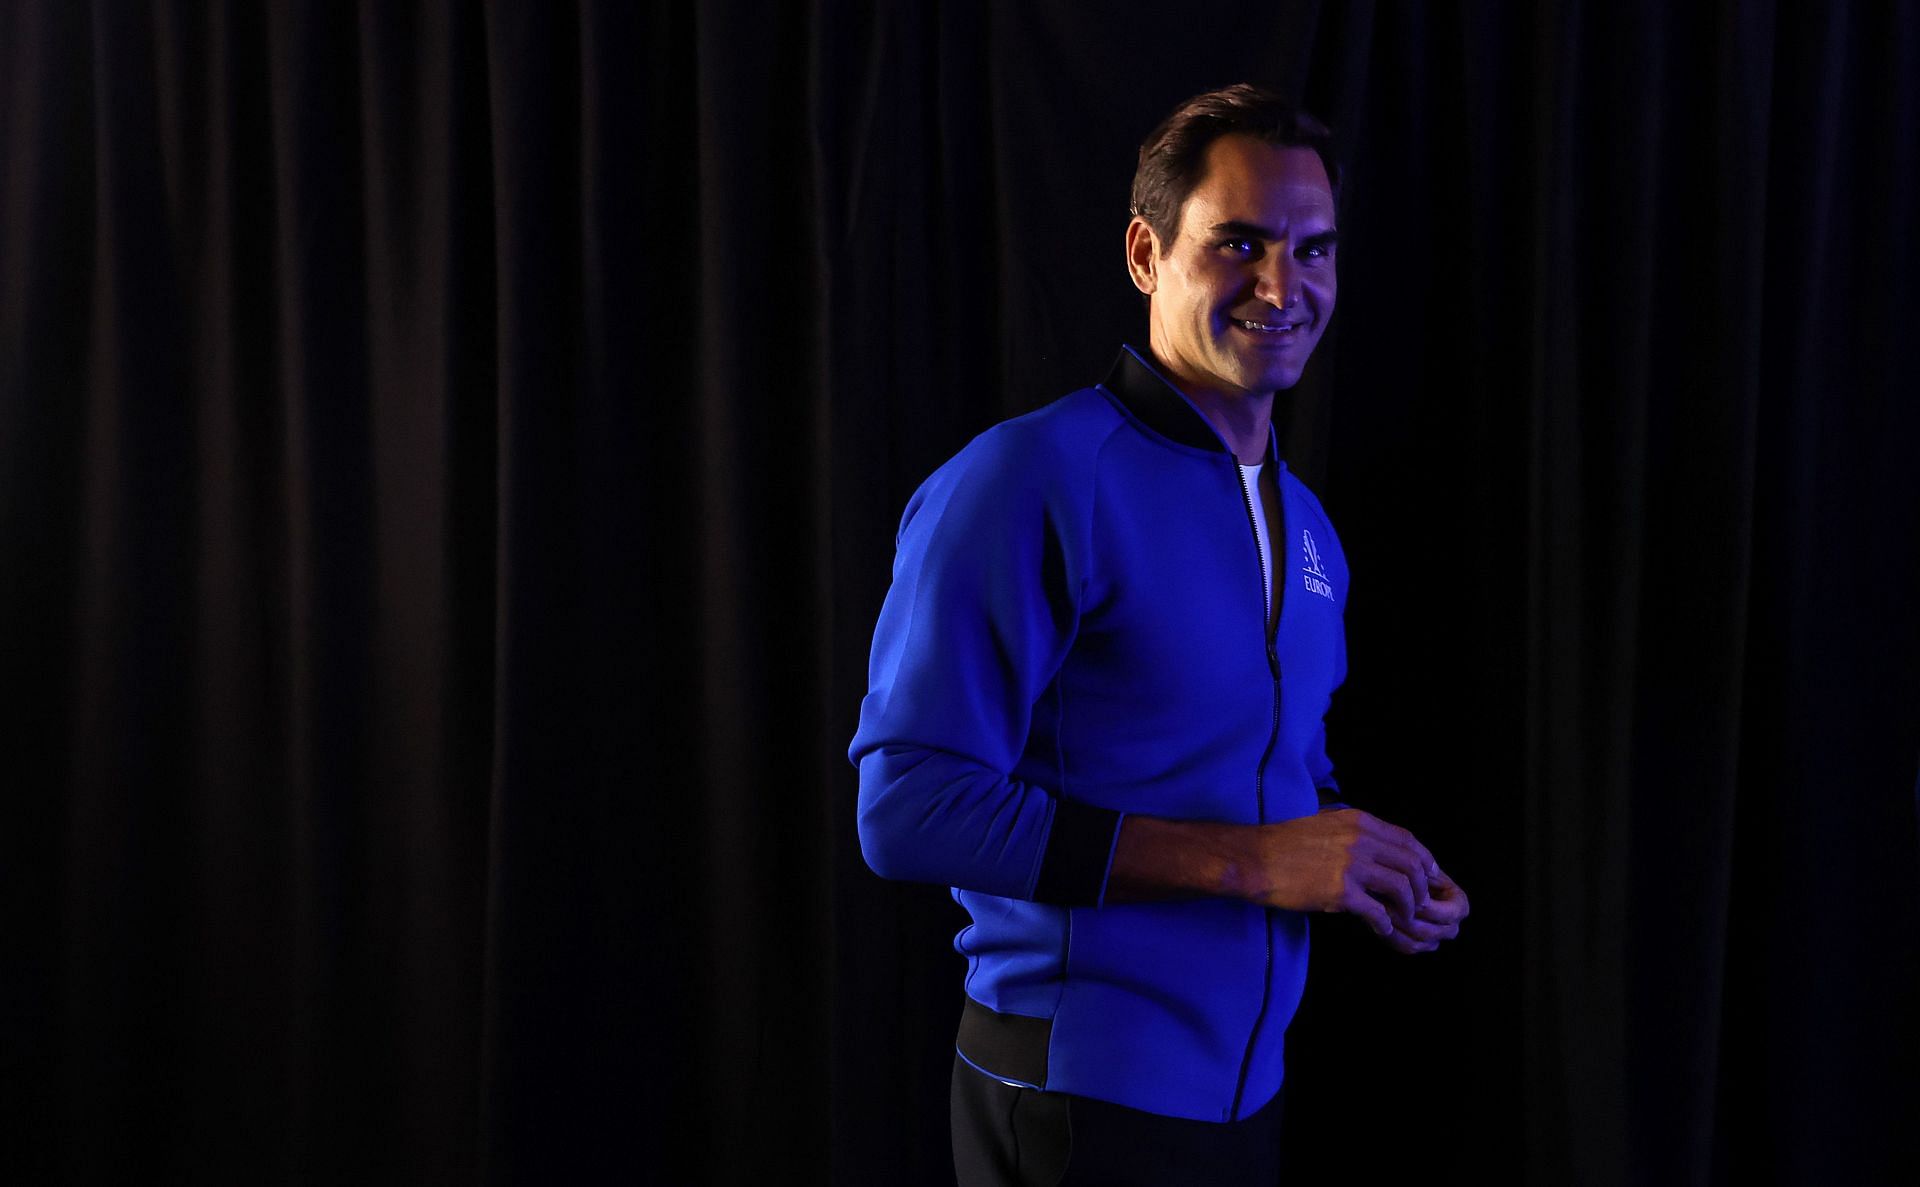 Roger Federer at the Laver Cup - Day Three